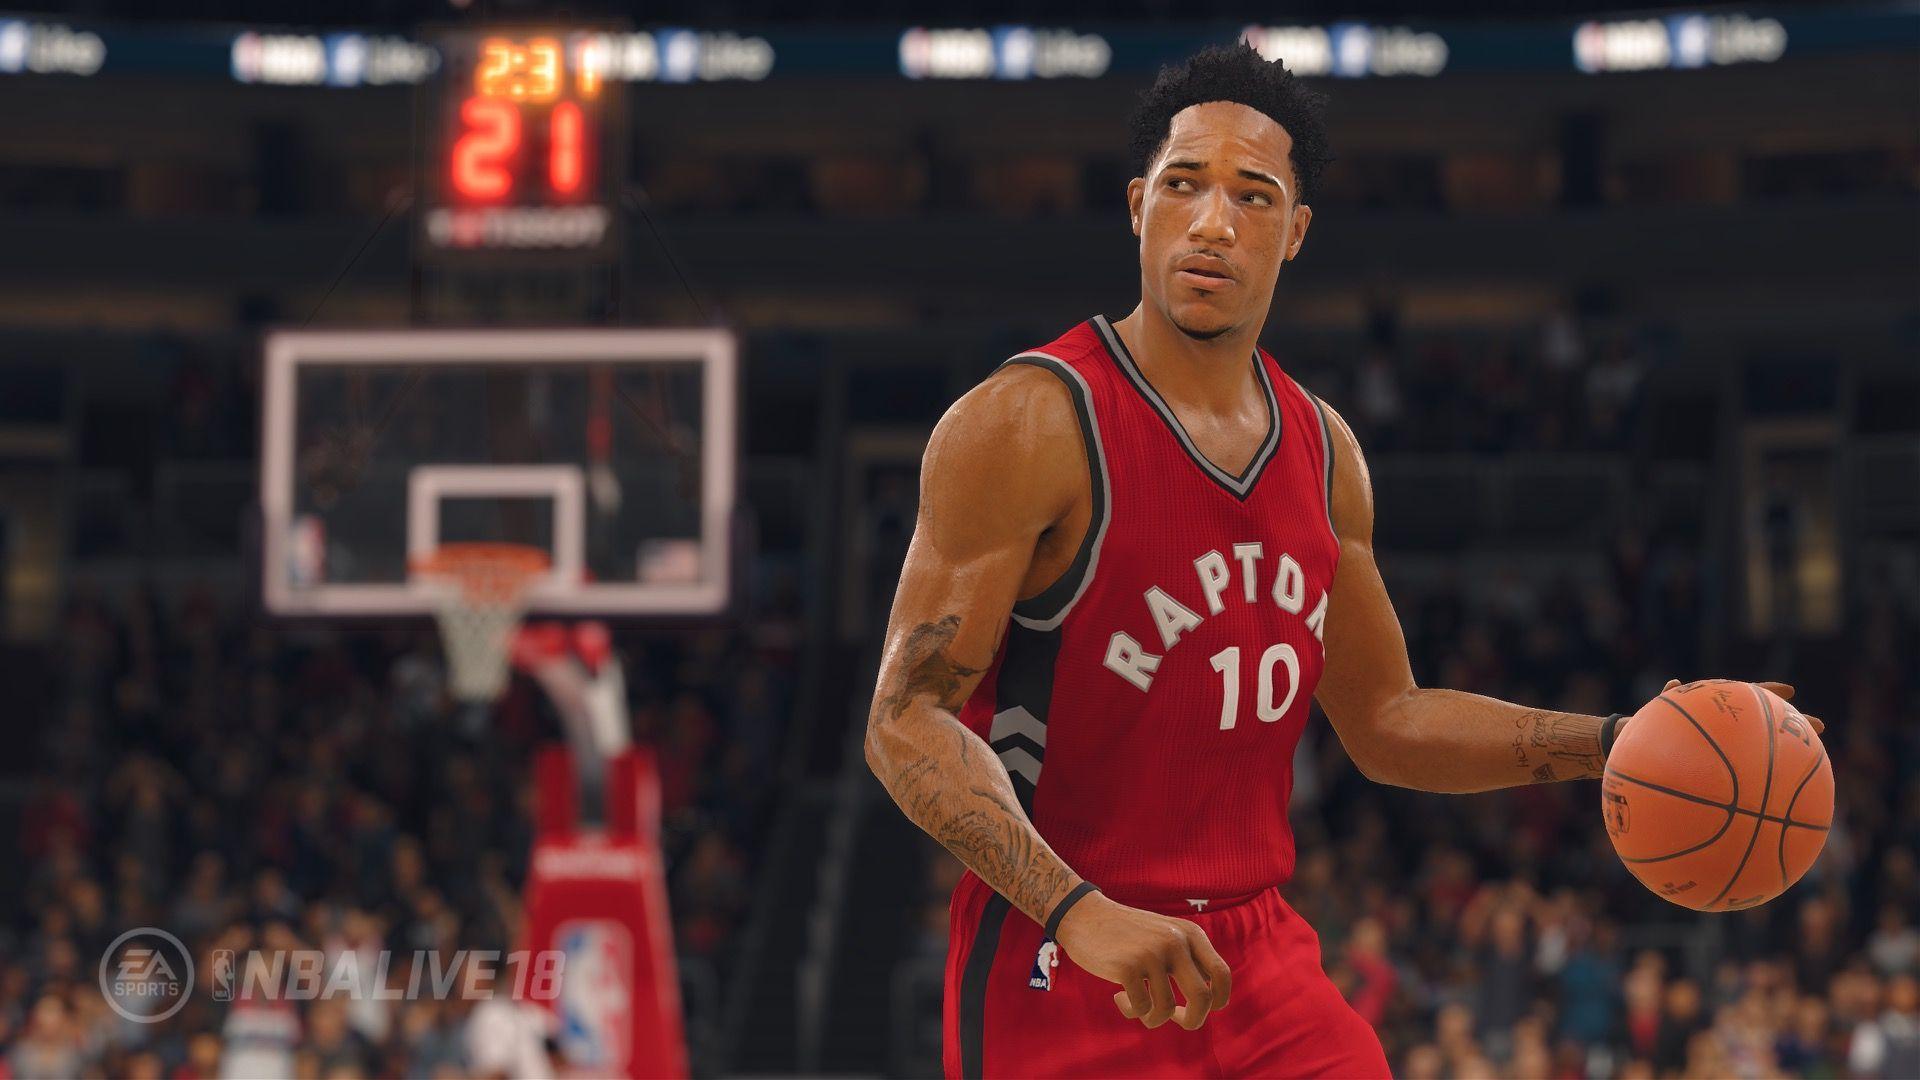 Seeking Reinvention, NBA Live 18 Finds Inspiration In Destiny